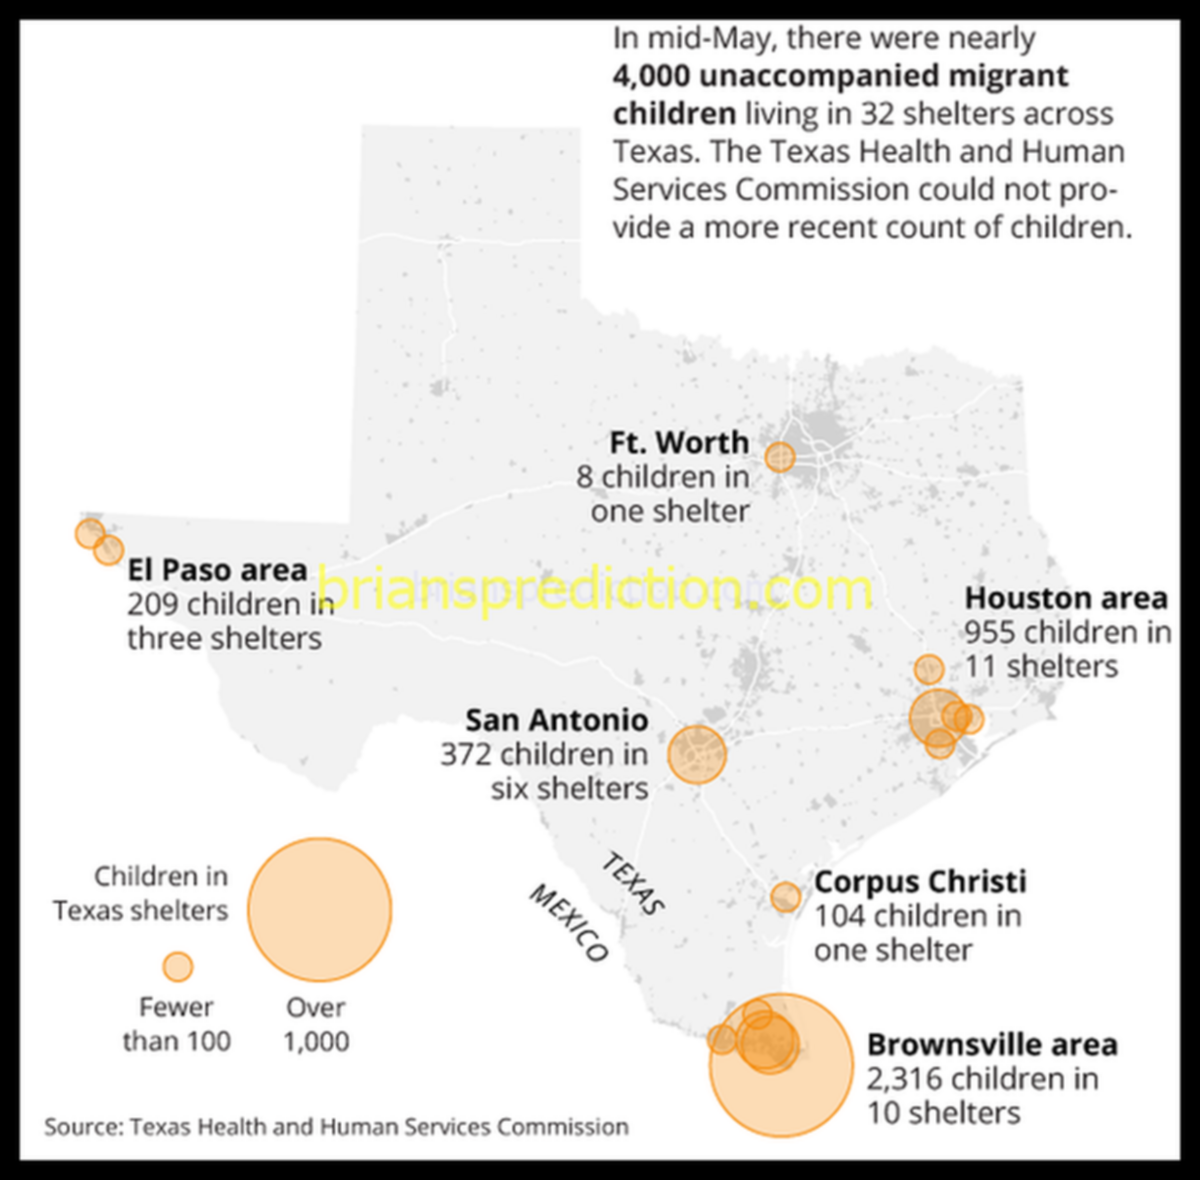 Shiloh Residential Treatment Center in Manvel Texas shelters-map-for-reveal drugging kids deaths psychic ladd
Shiloh Residential Treatment Center in Manvel Texas shelters-map-for-reveal drugging kids deaths psychic ladd
